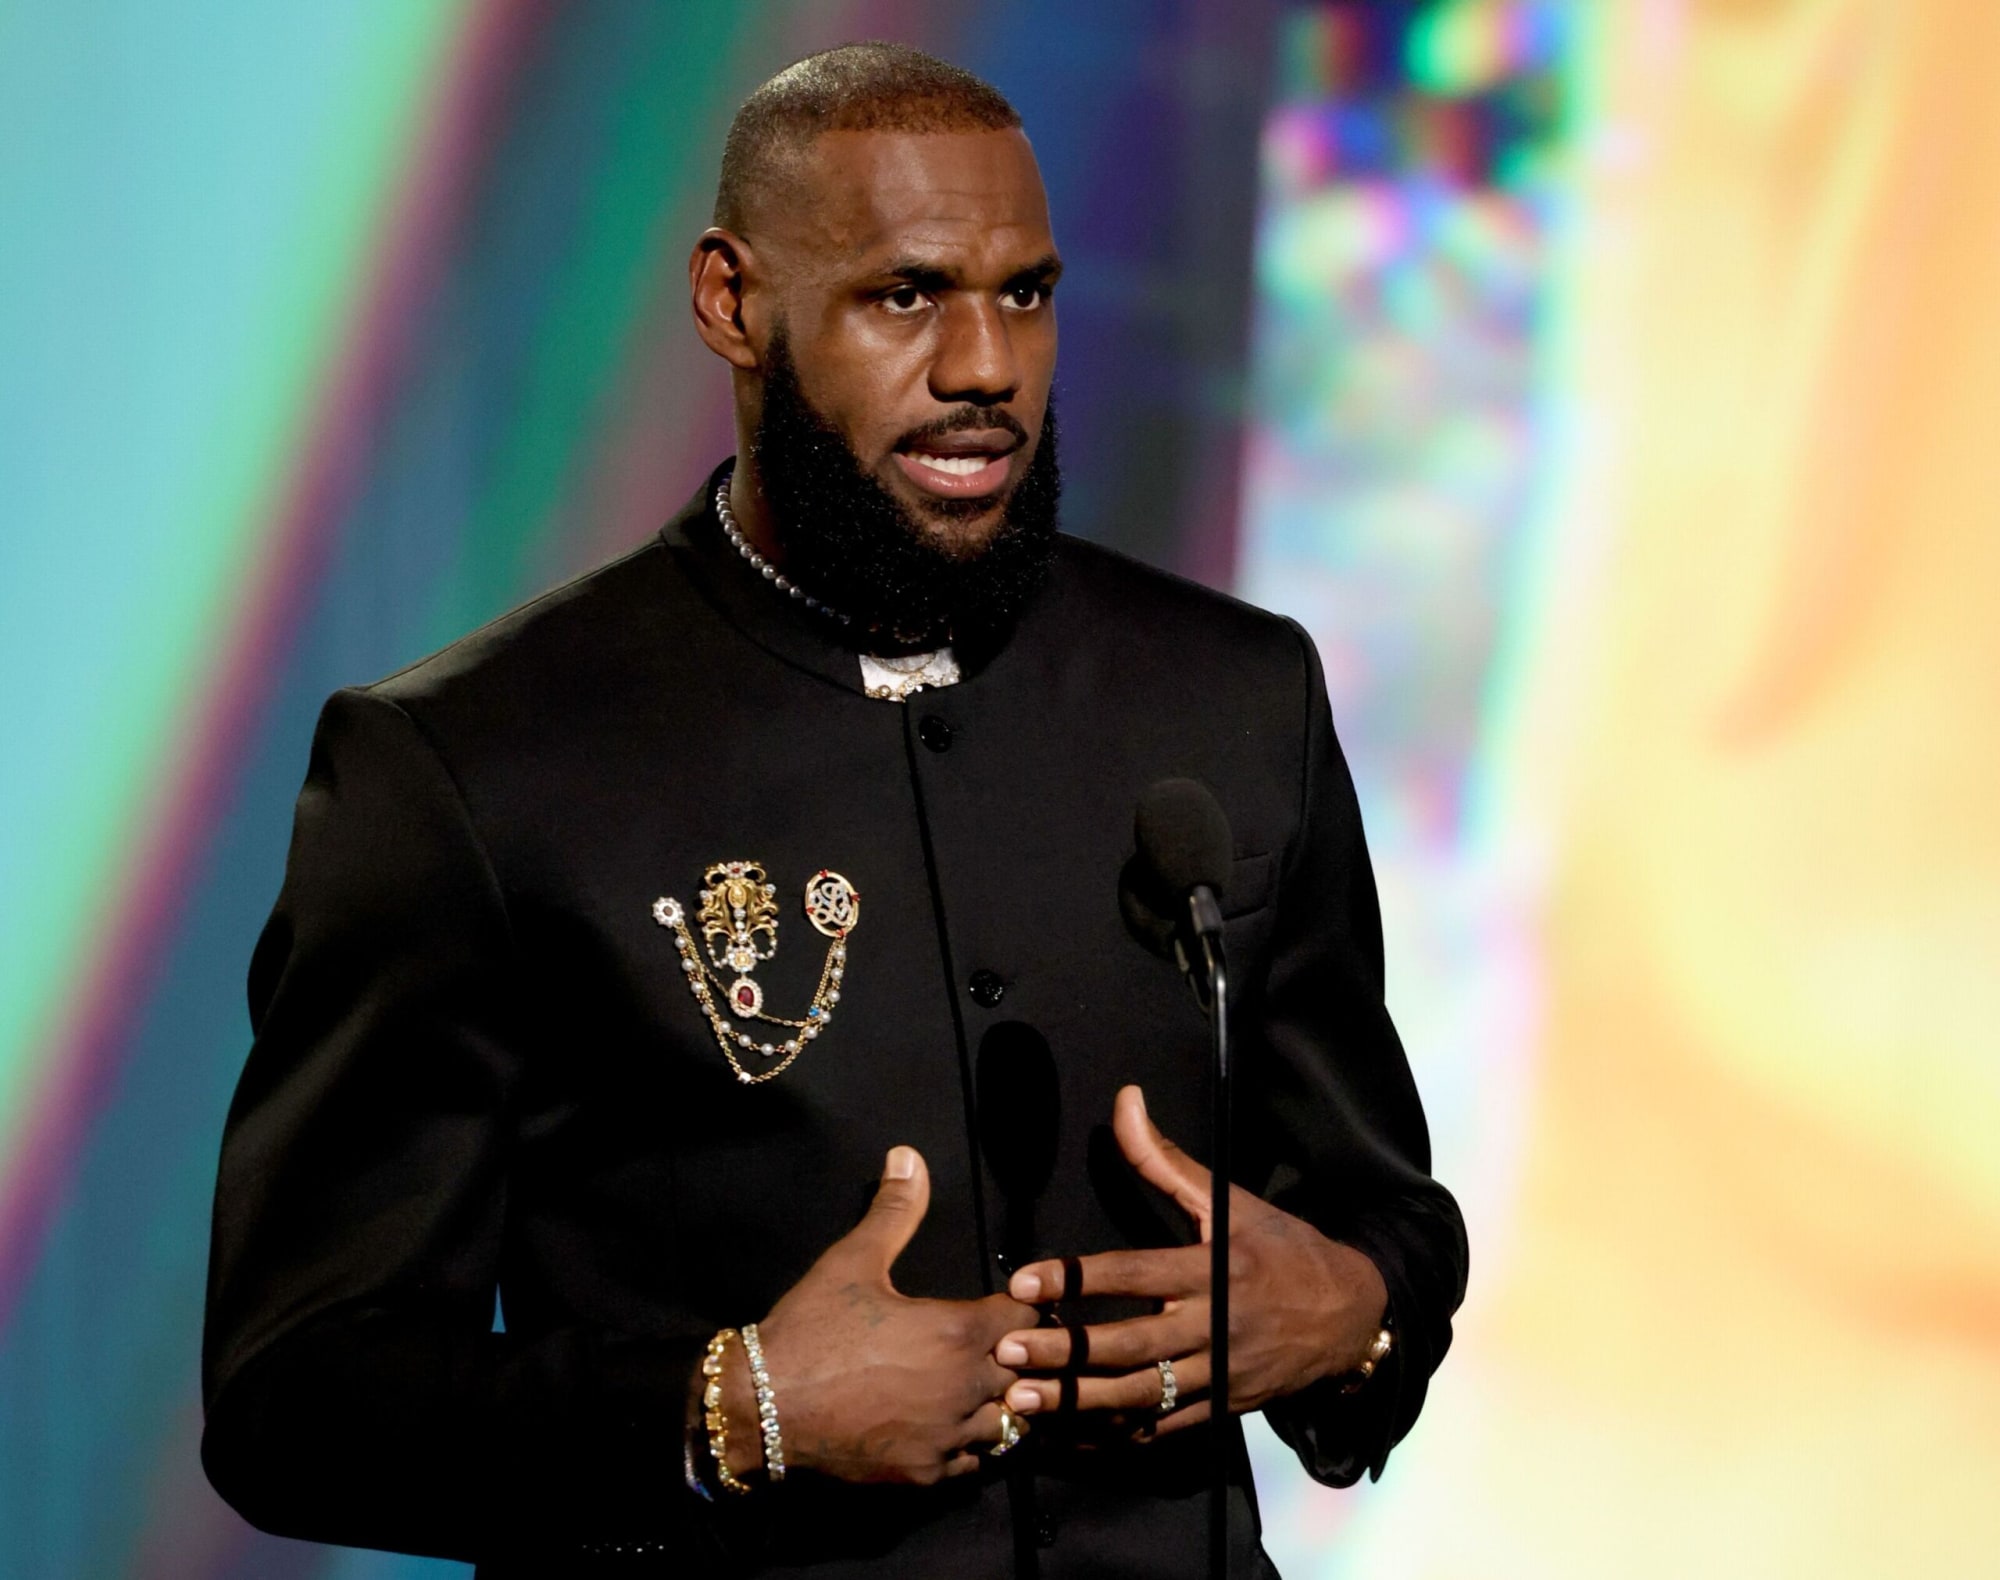 LeBron James confirms obvious about retirement in fiery ESPYs speech